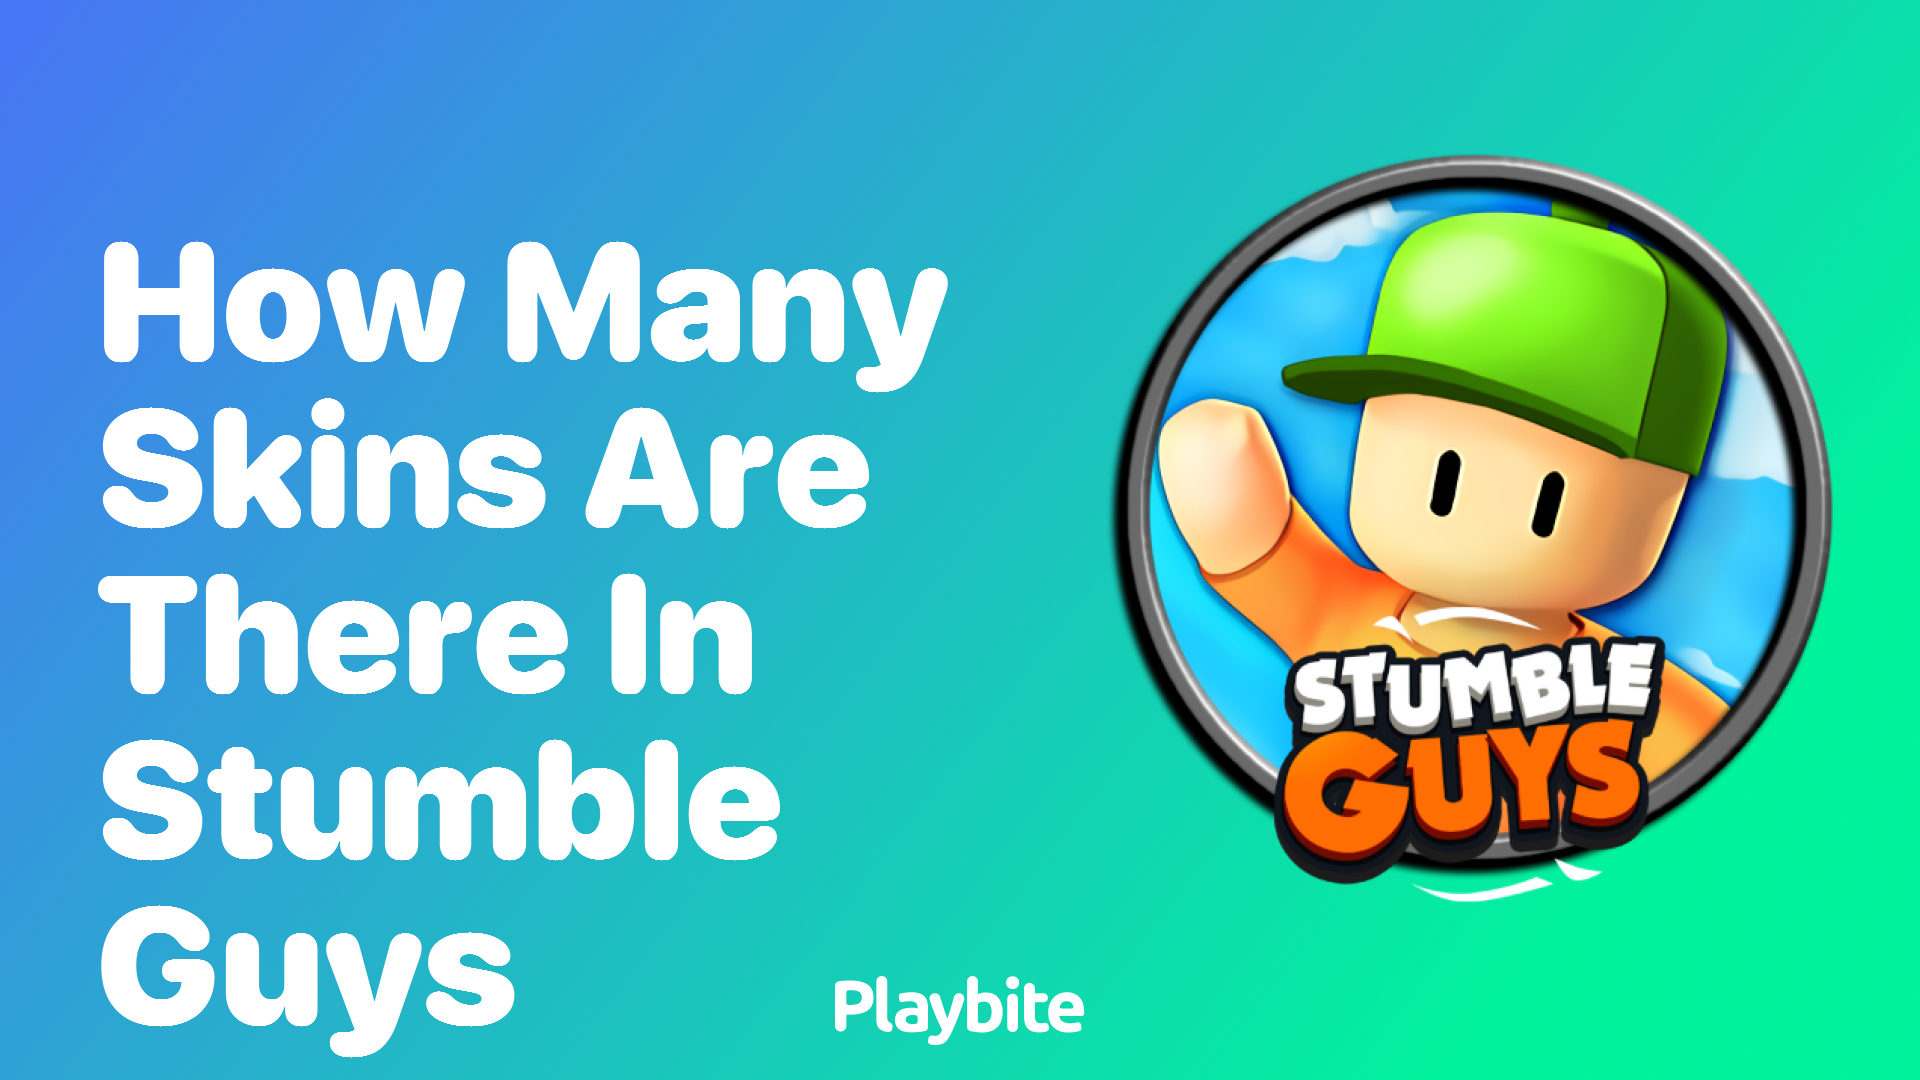 How Many Skins Are There in Stumble Guys?